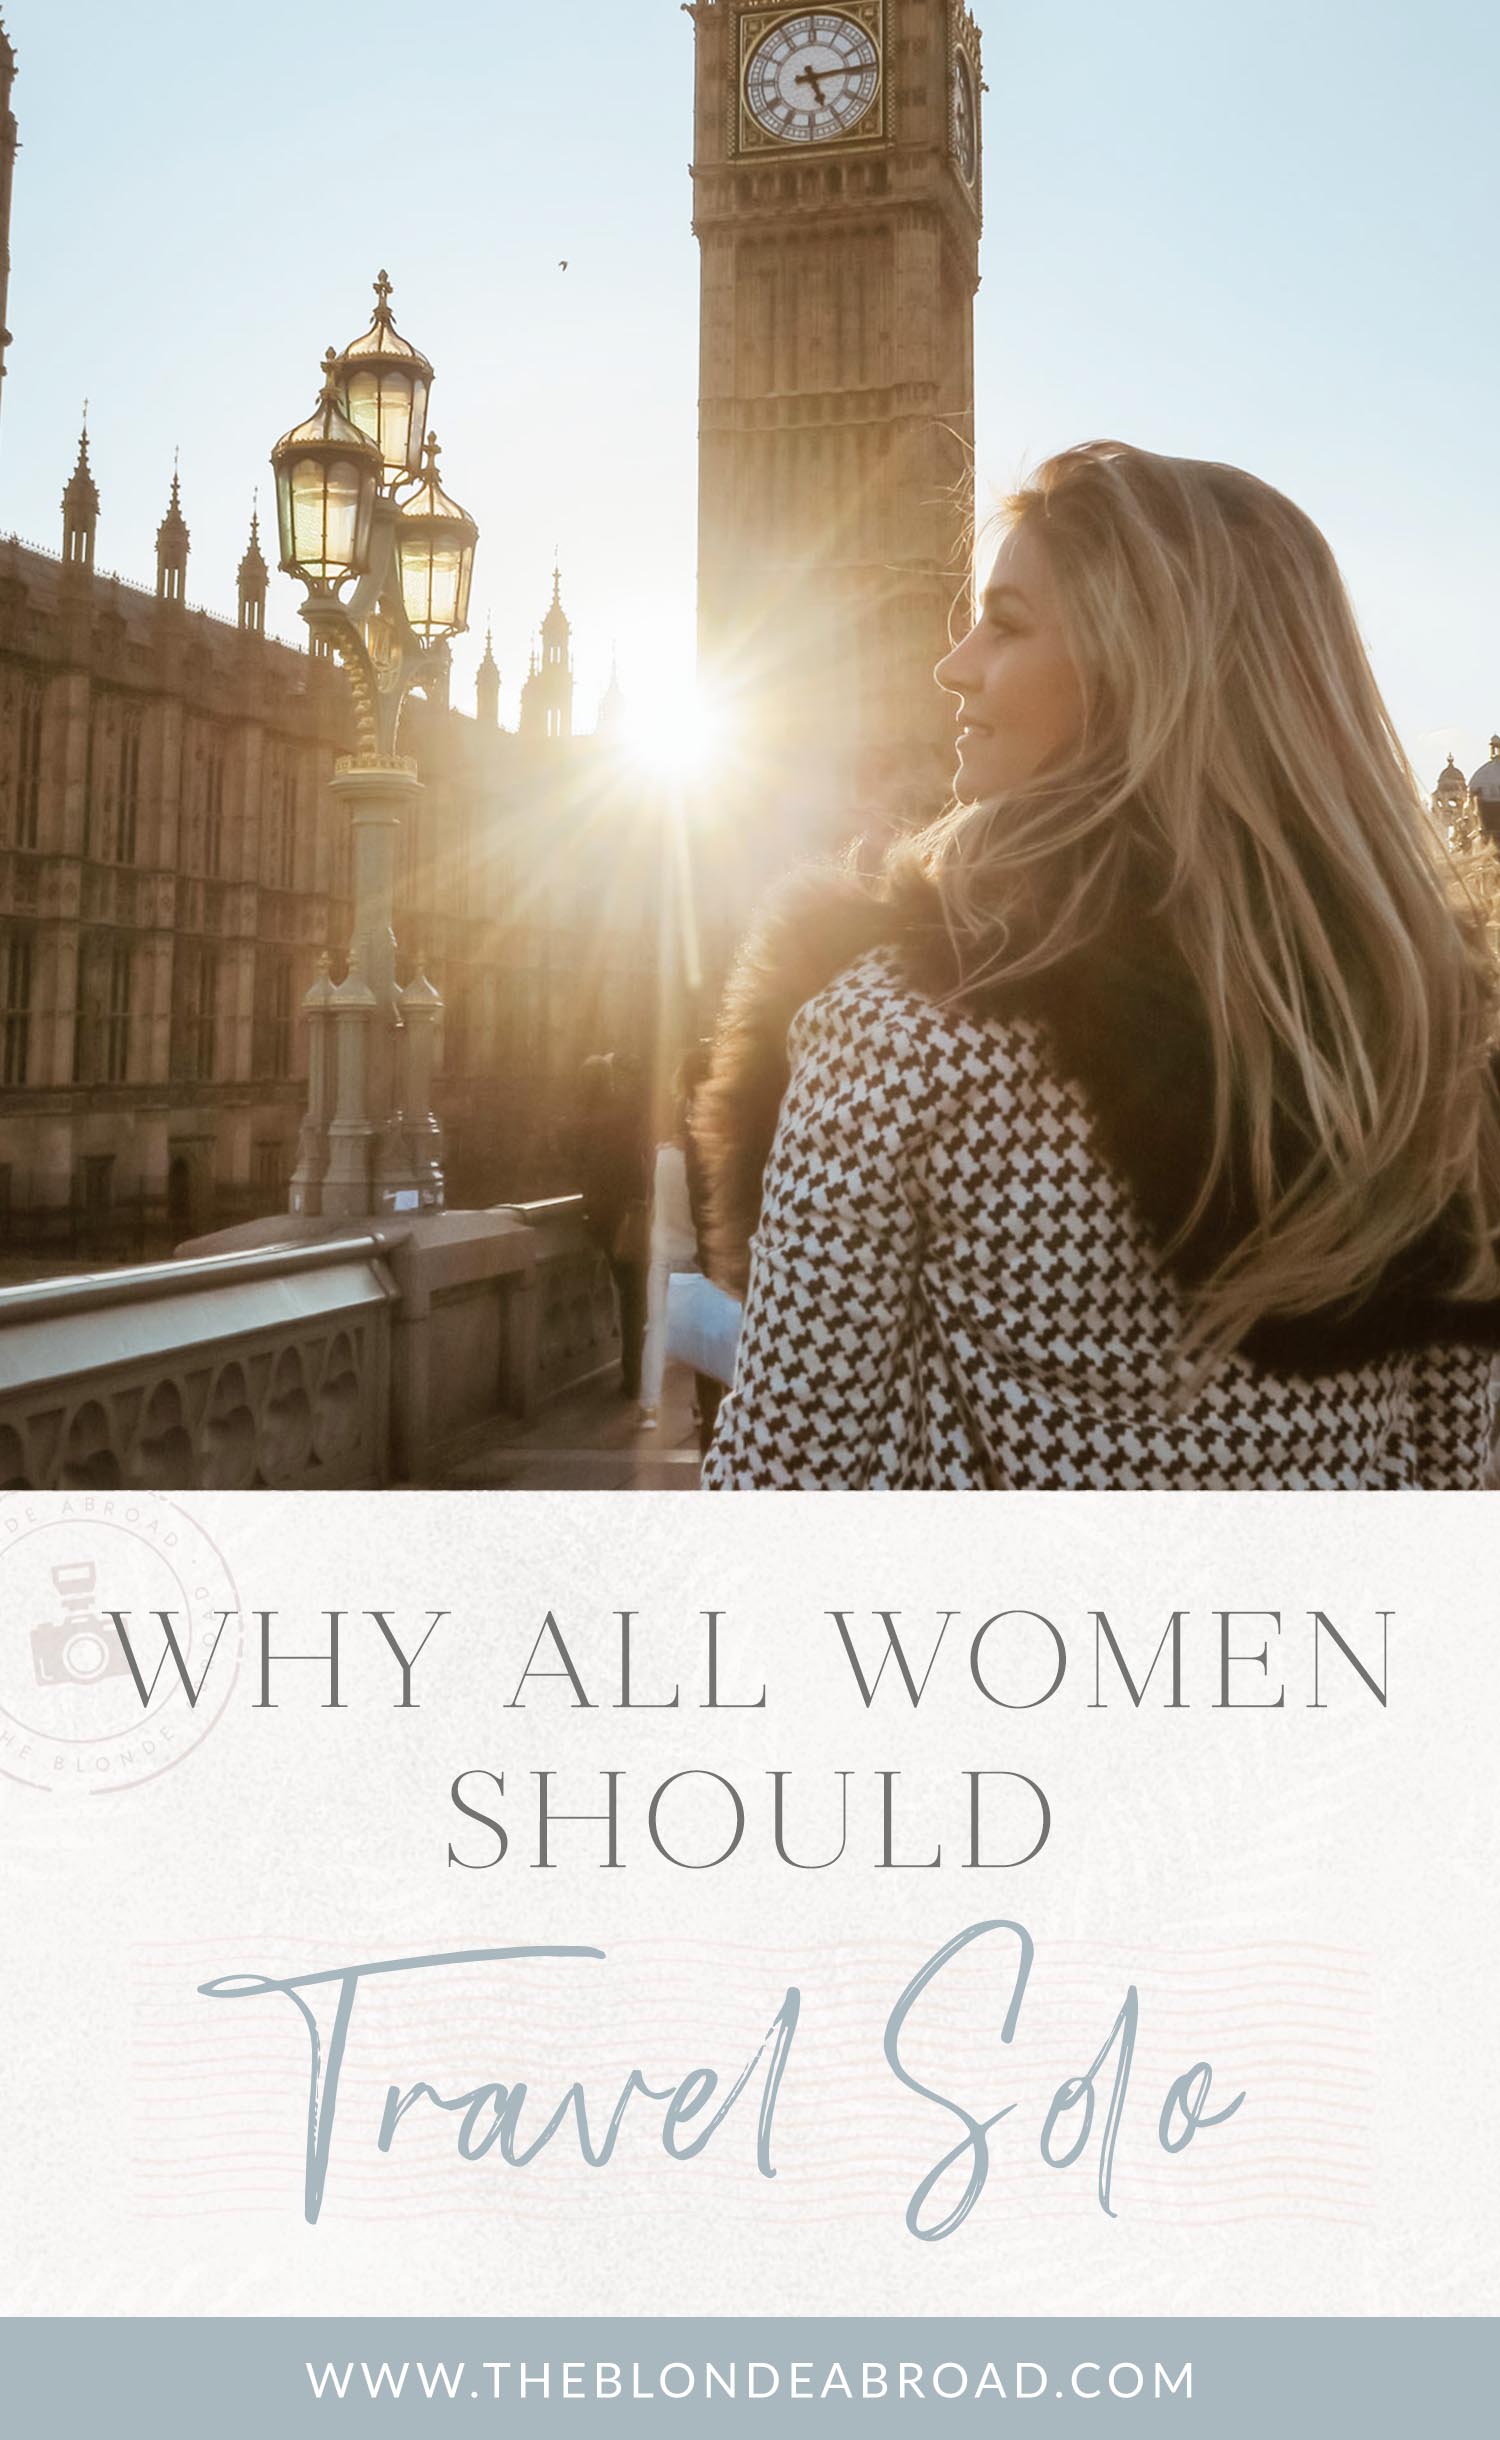 Why All Women Should Travel Solo copy